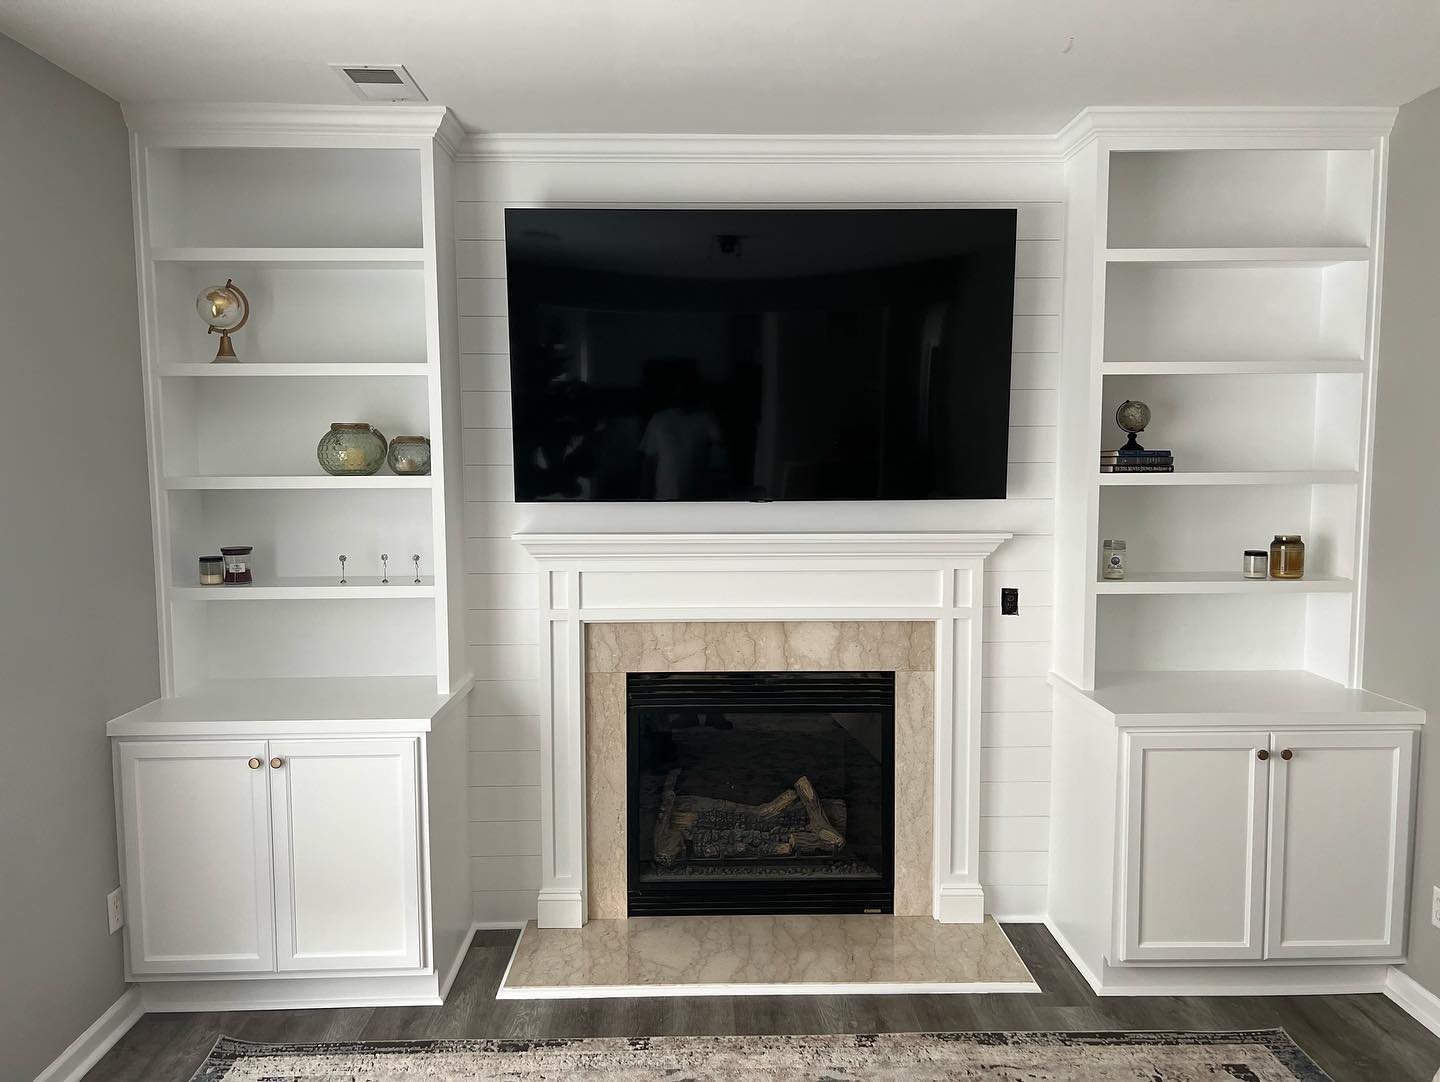 New builtin cabinets with bookshelves shiplap and fireplace trim 1